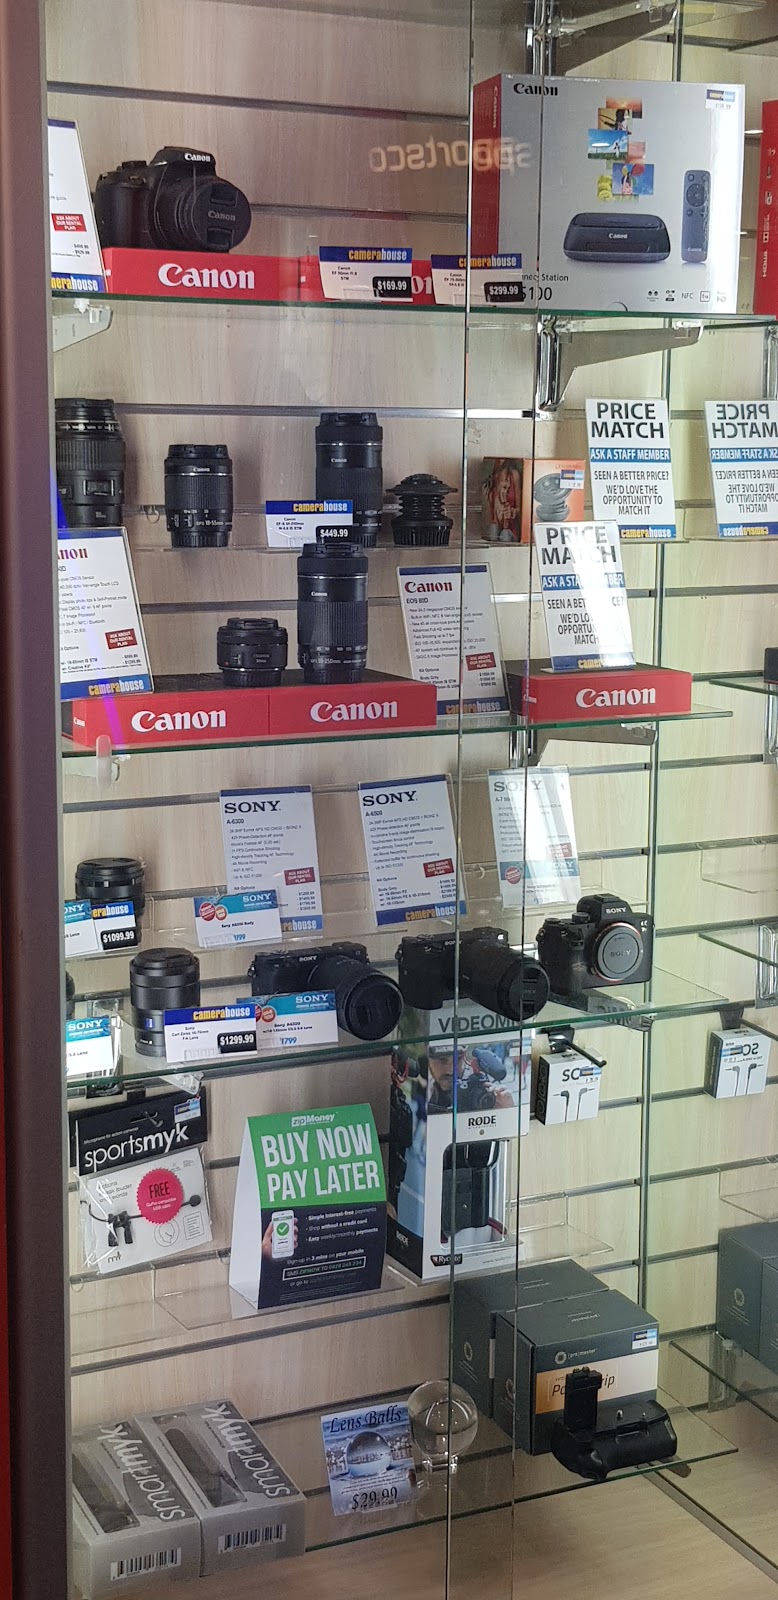 Camera House - Helensvale | electronics store | Shop 1081 Westfield Shopping Centre, 11 Town Centre Dr, Helensvale QLD 4212, Australia | 0755560477 OR +61 7 5556 0477